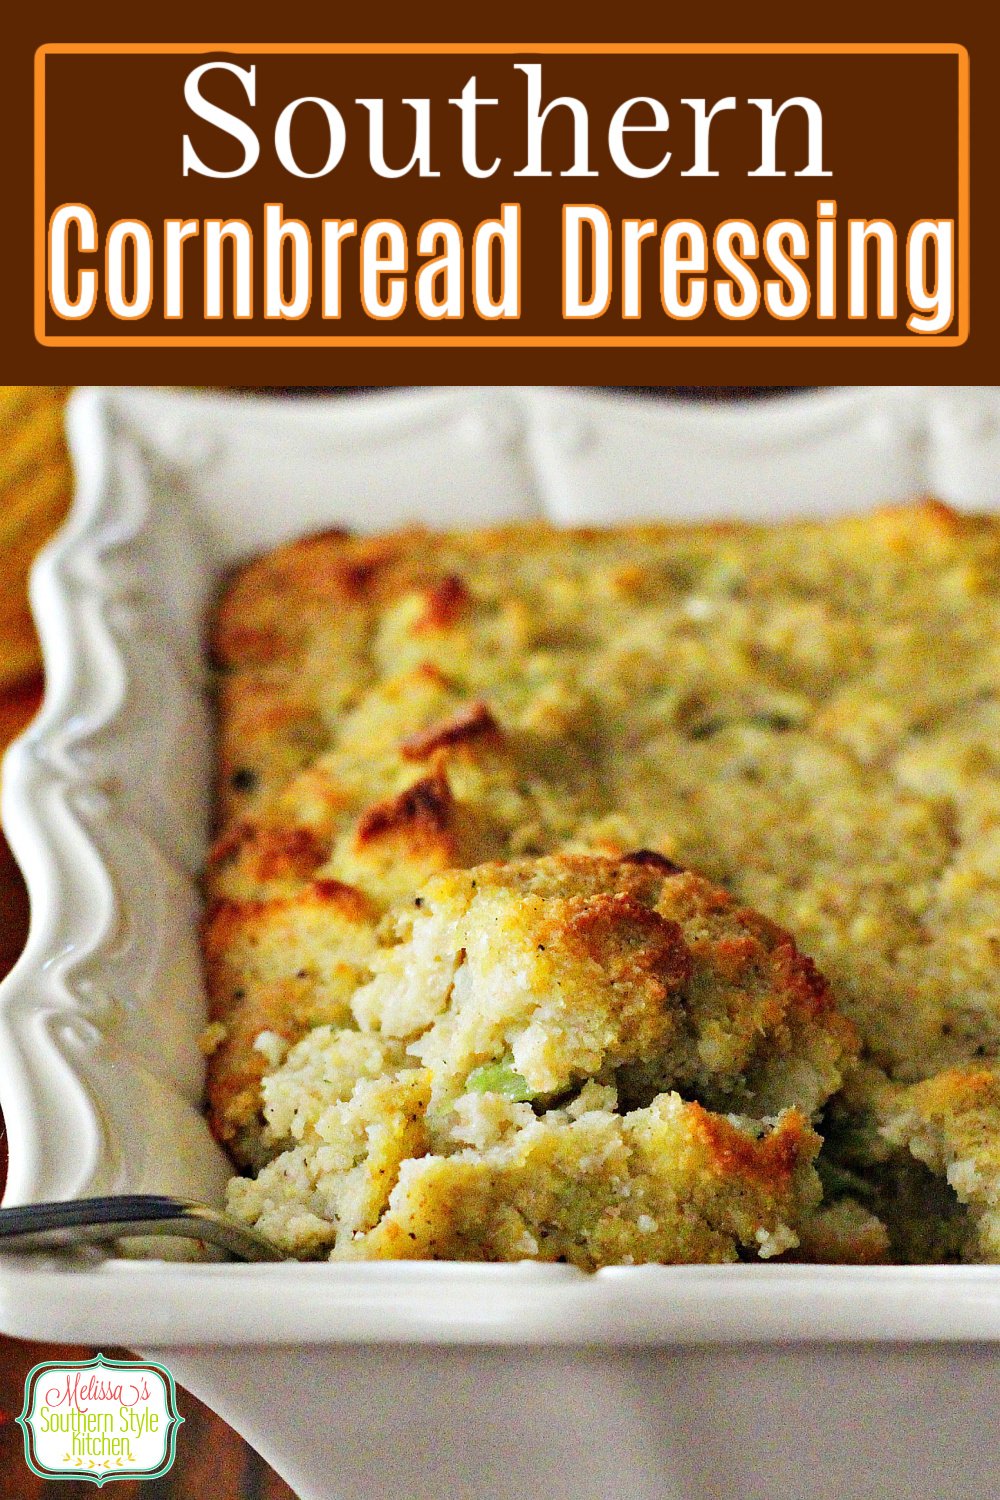 Mouthwatering Southern Cornbread Dressing topped with a drizzle of gravy is the perfect holiday side #dressing #cornbreaddressing #stuffing #southerndressing #thanksgiving #holidaysides #holidaybaking Thanksgiving #christmas #southernfood #cornbread #southernrecipes via @melissasssk